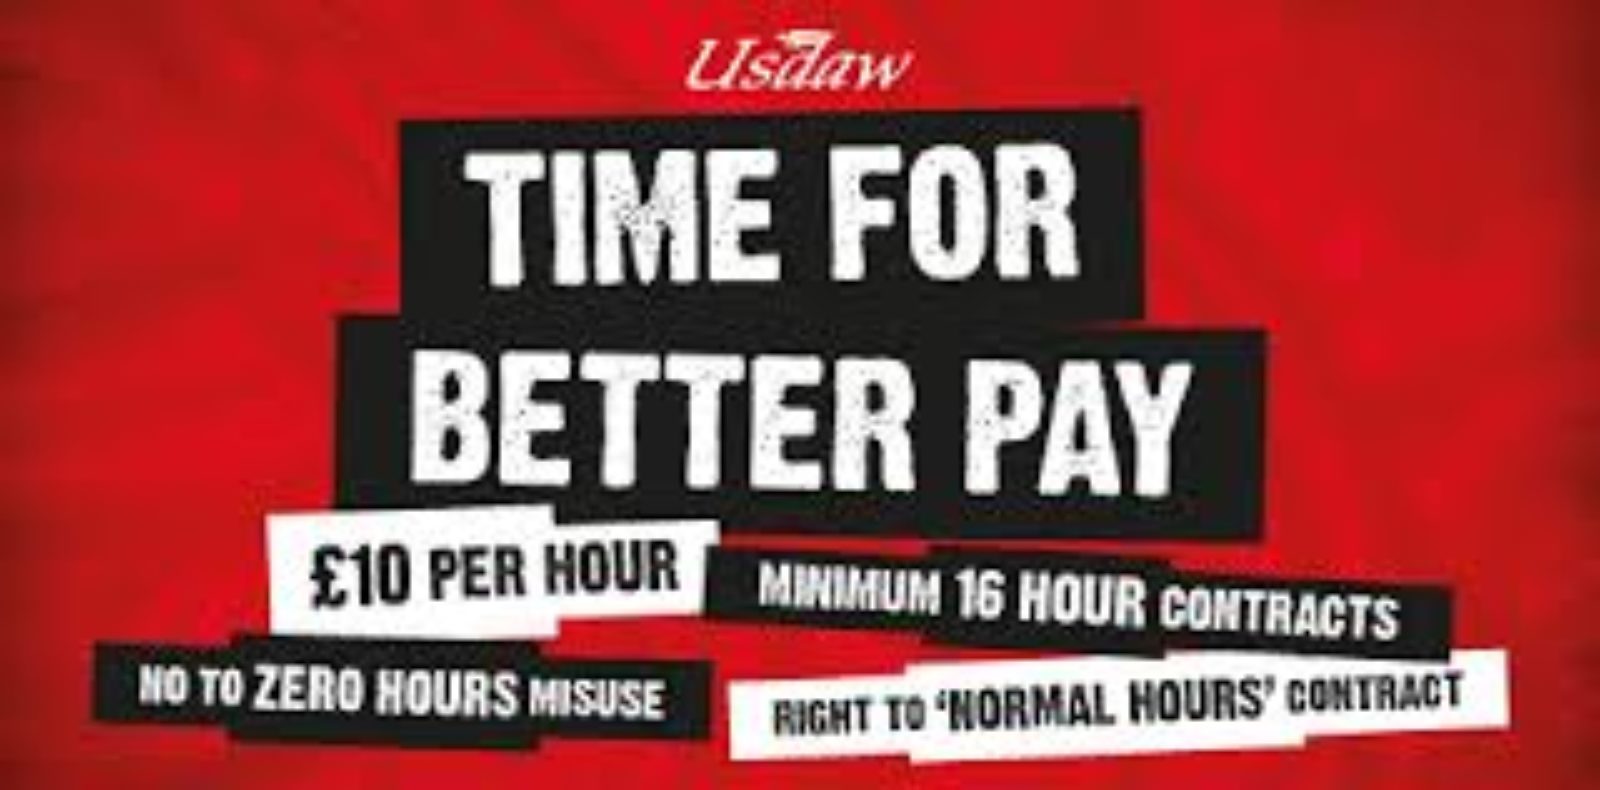 Usdaw campaign for better pay